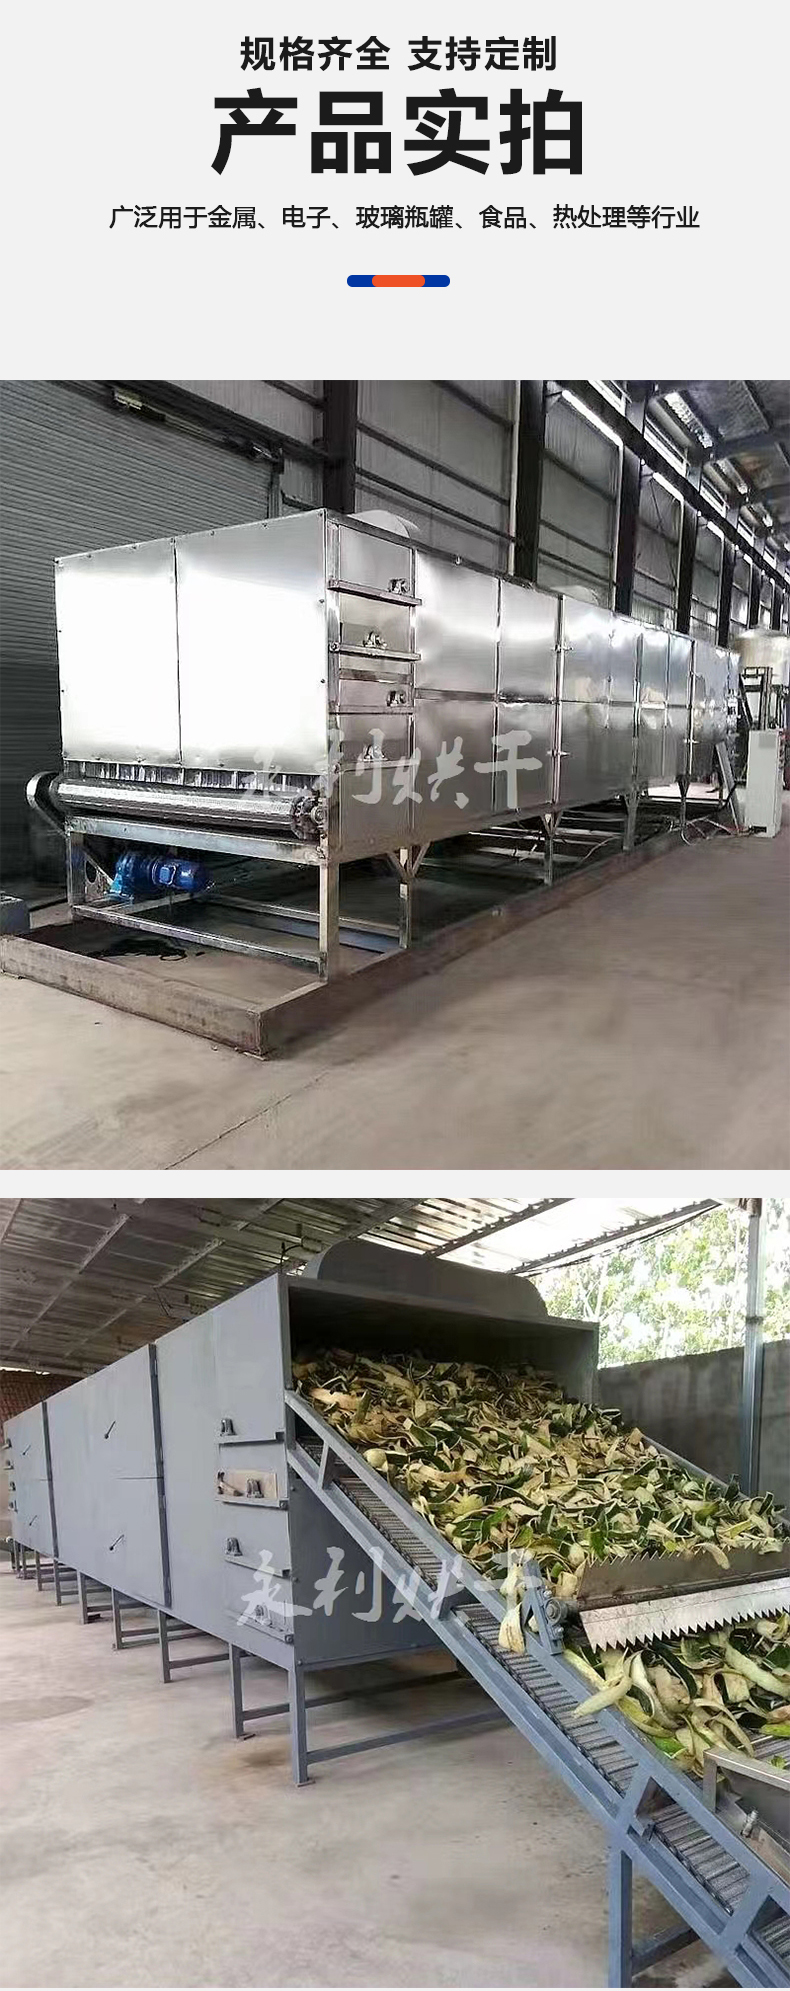 Two layer continuous belt dryer for building materials and panels, fire-resistant material drying equipment, fire-resistant exterior wall panel drying machine